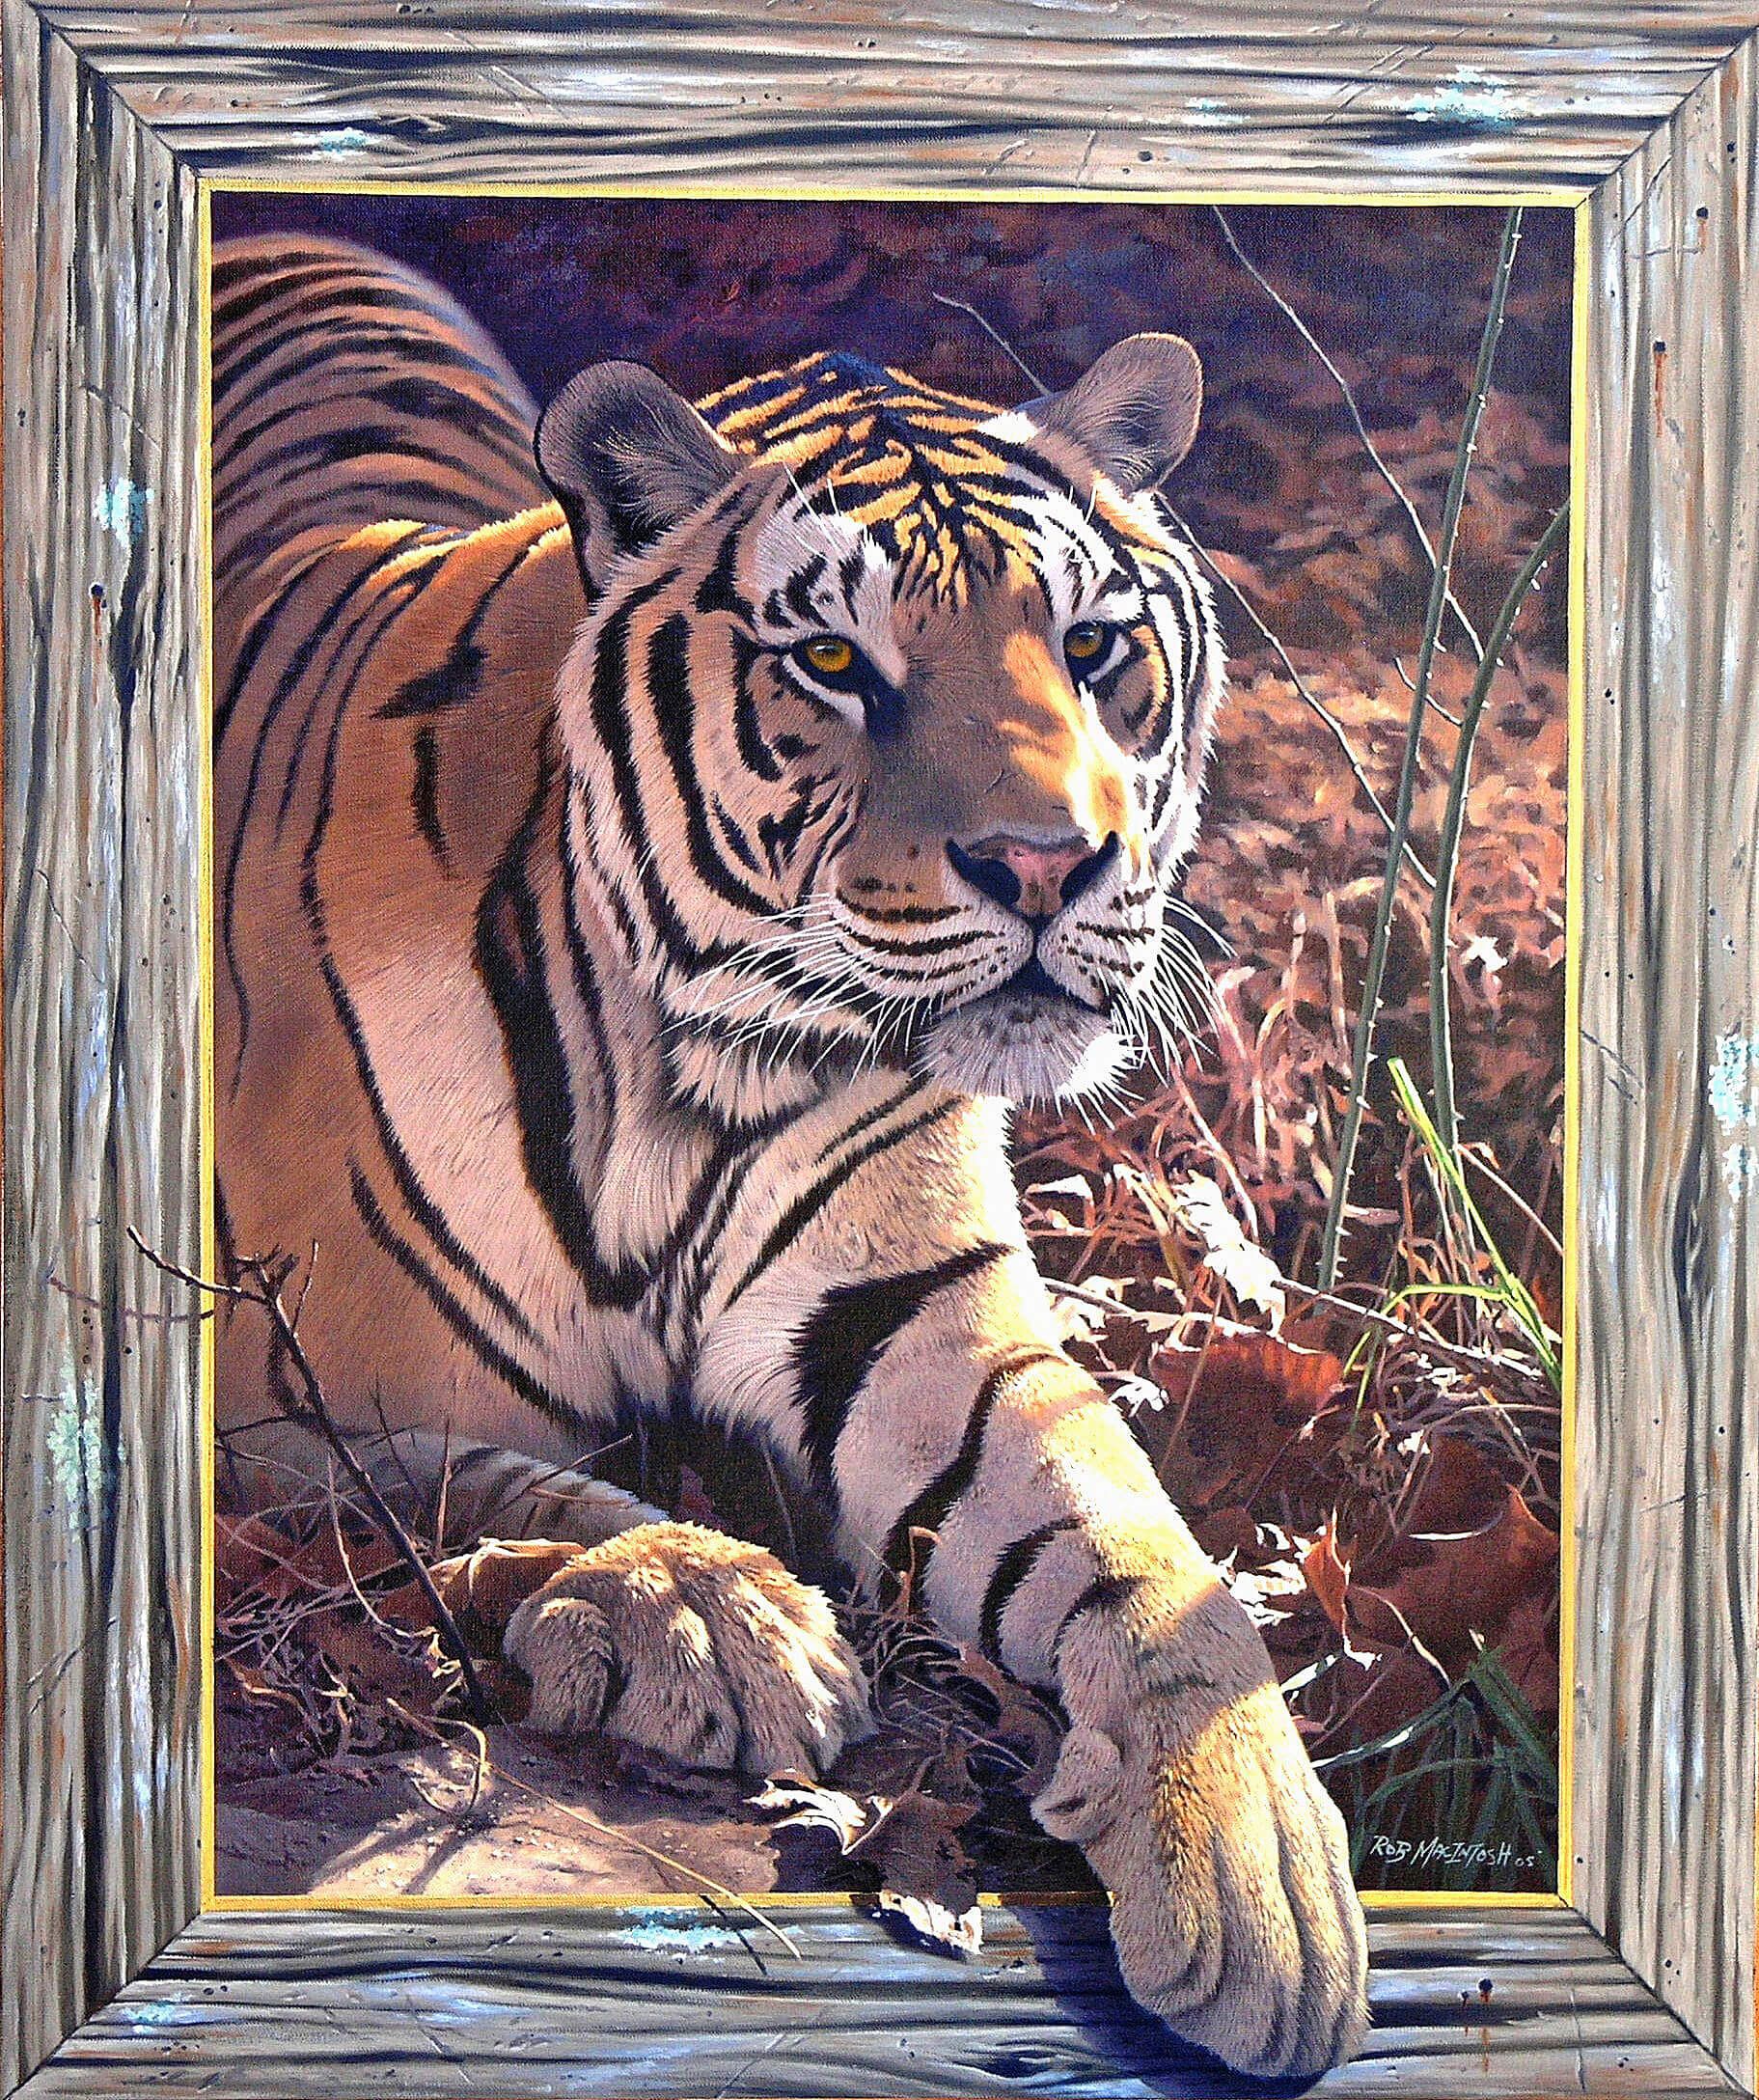 Photorealistic painting of a tiger ready to pounce